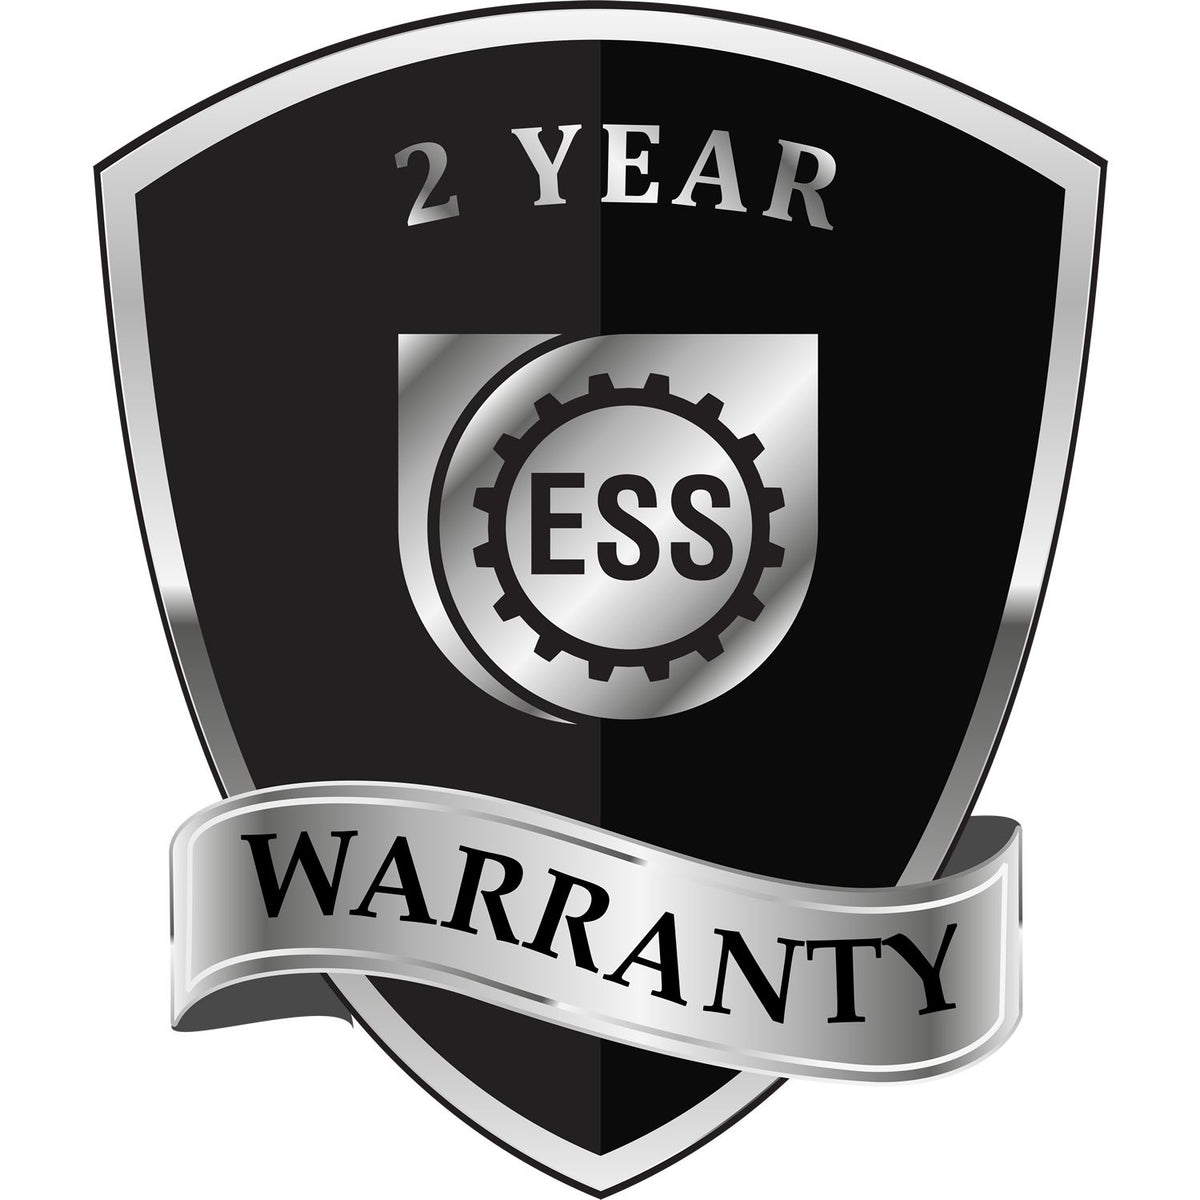 A black and silver badge or emblem showing warranty information for the Gift Wyoming Engineer Seal